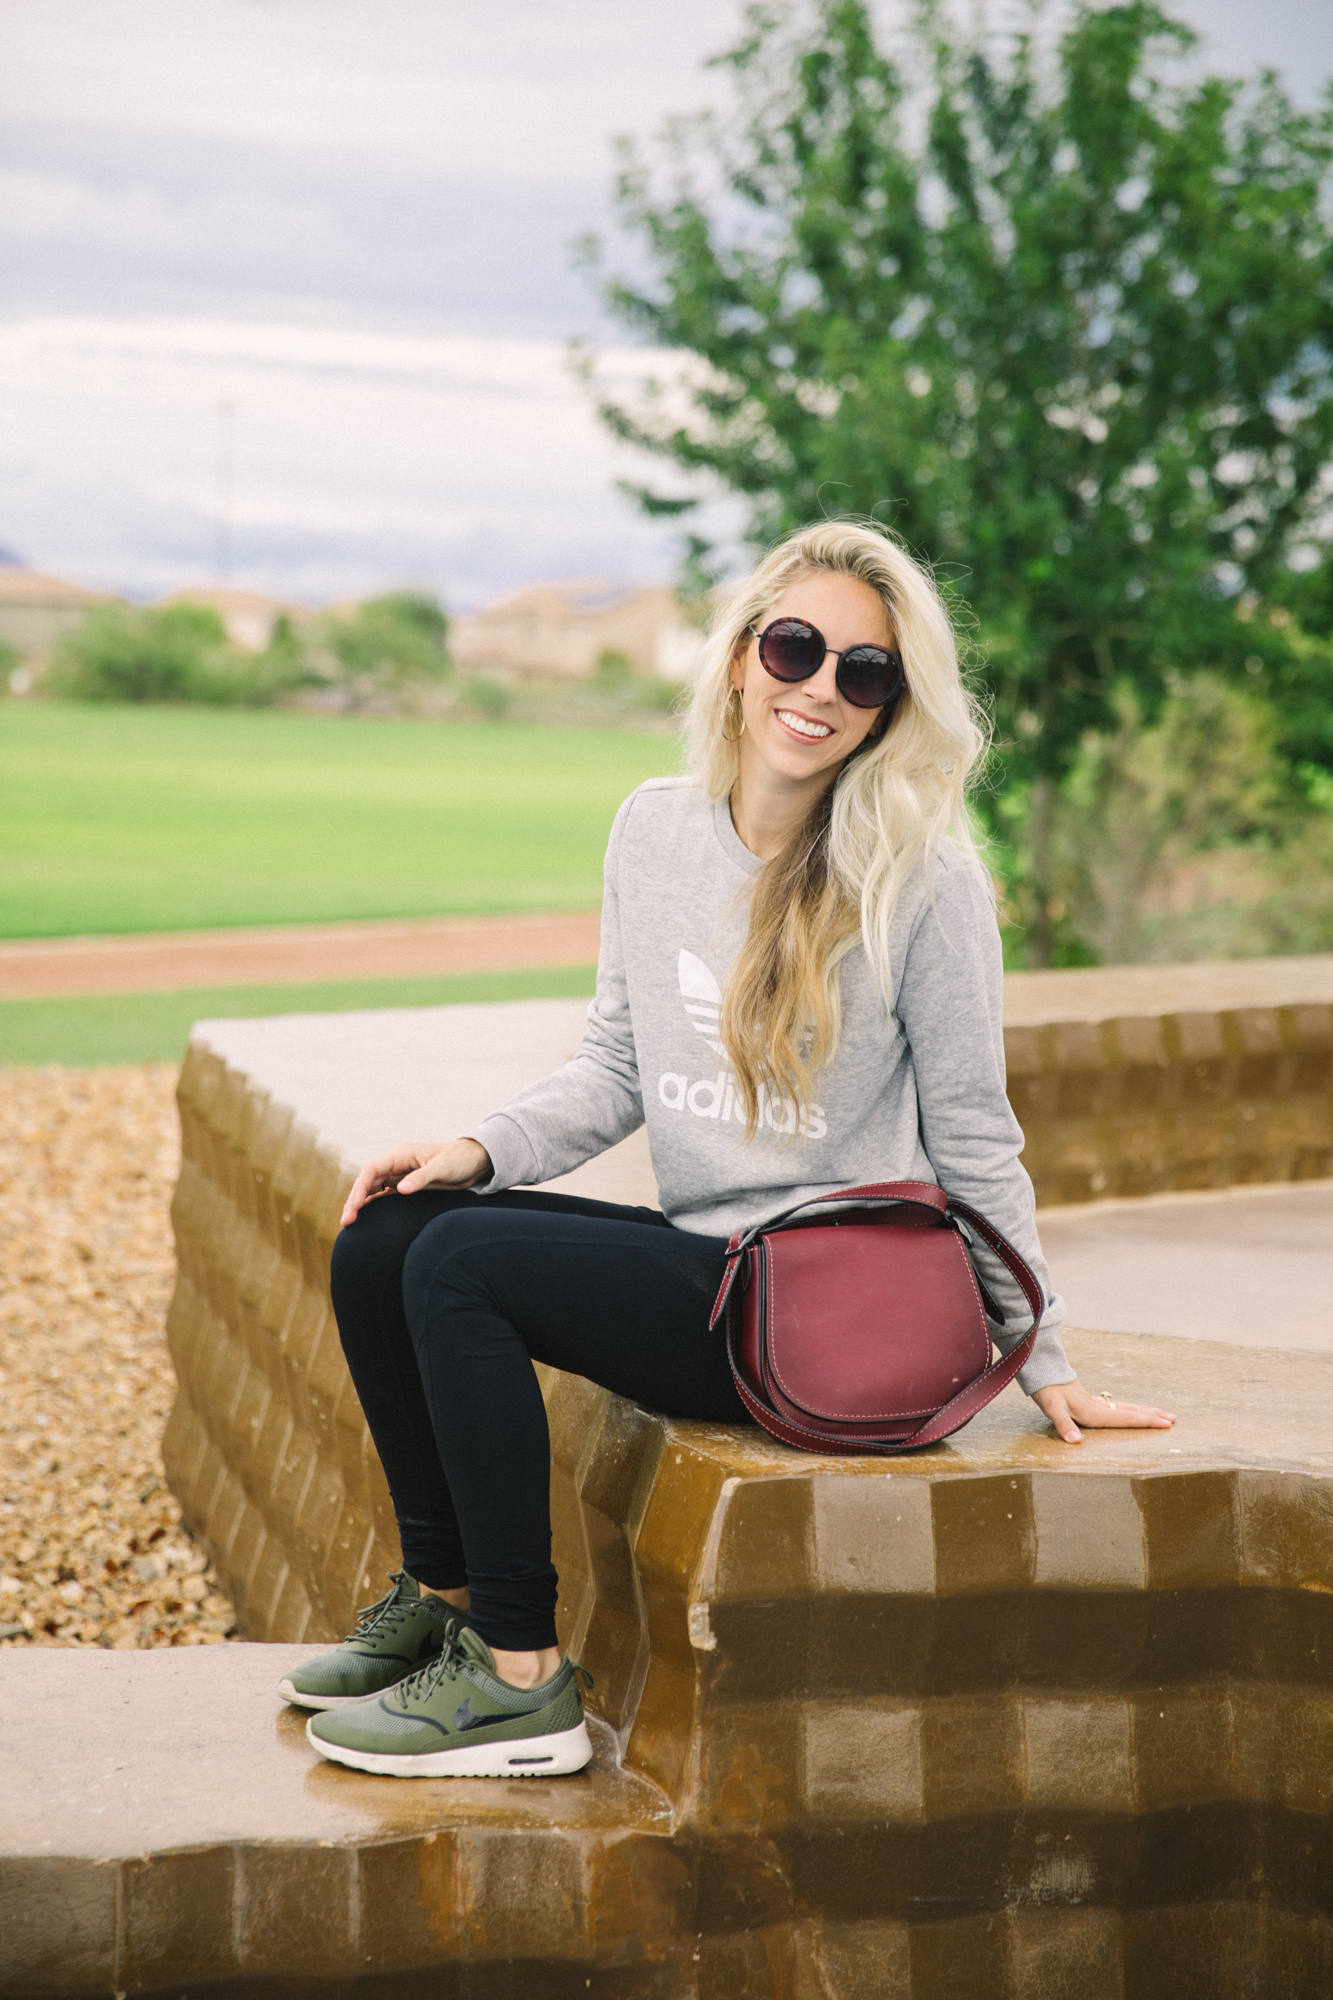 The Perfect Athletic Wear by Las Vegas fashion blogger Life of a Sister